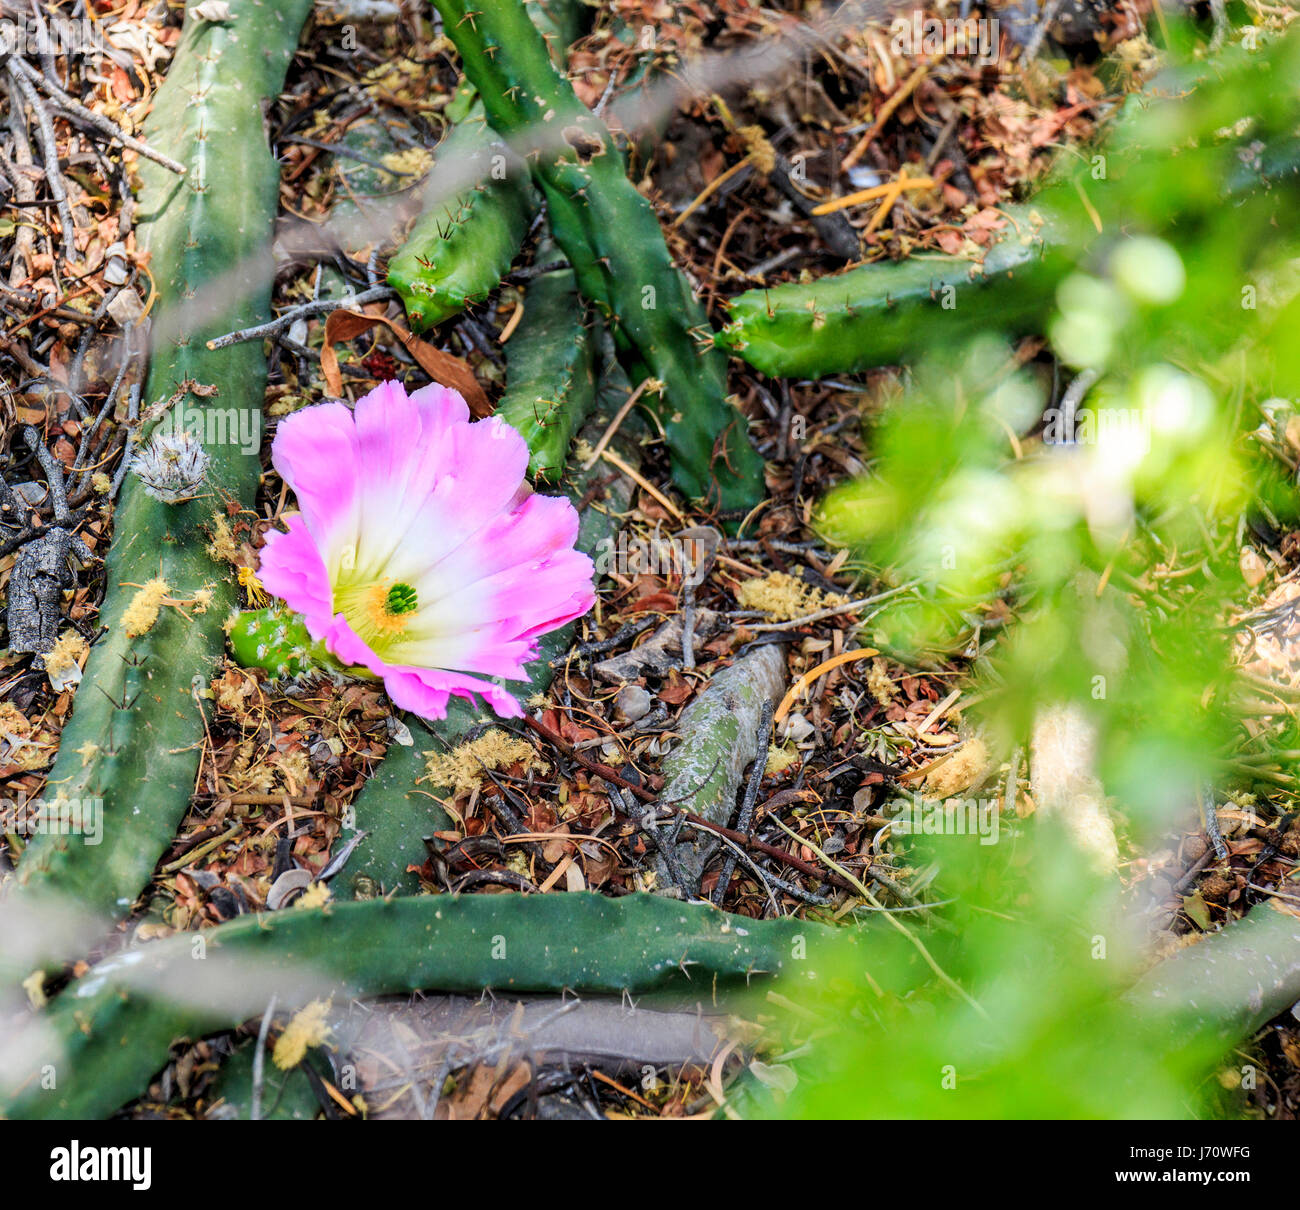 Purple bloom on an alichoche or lady finger cactus. Stock Photo